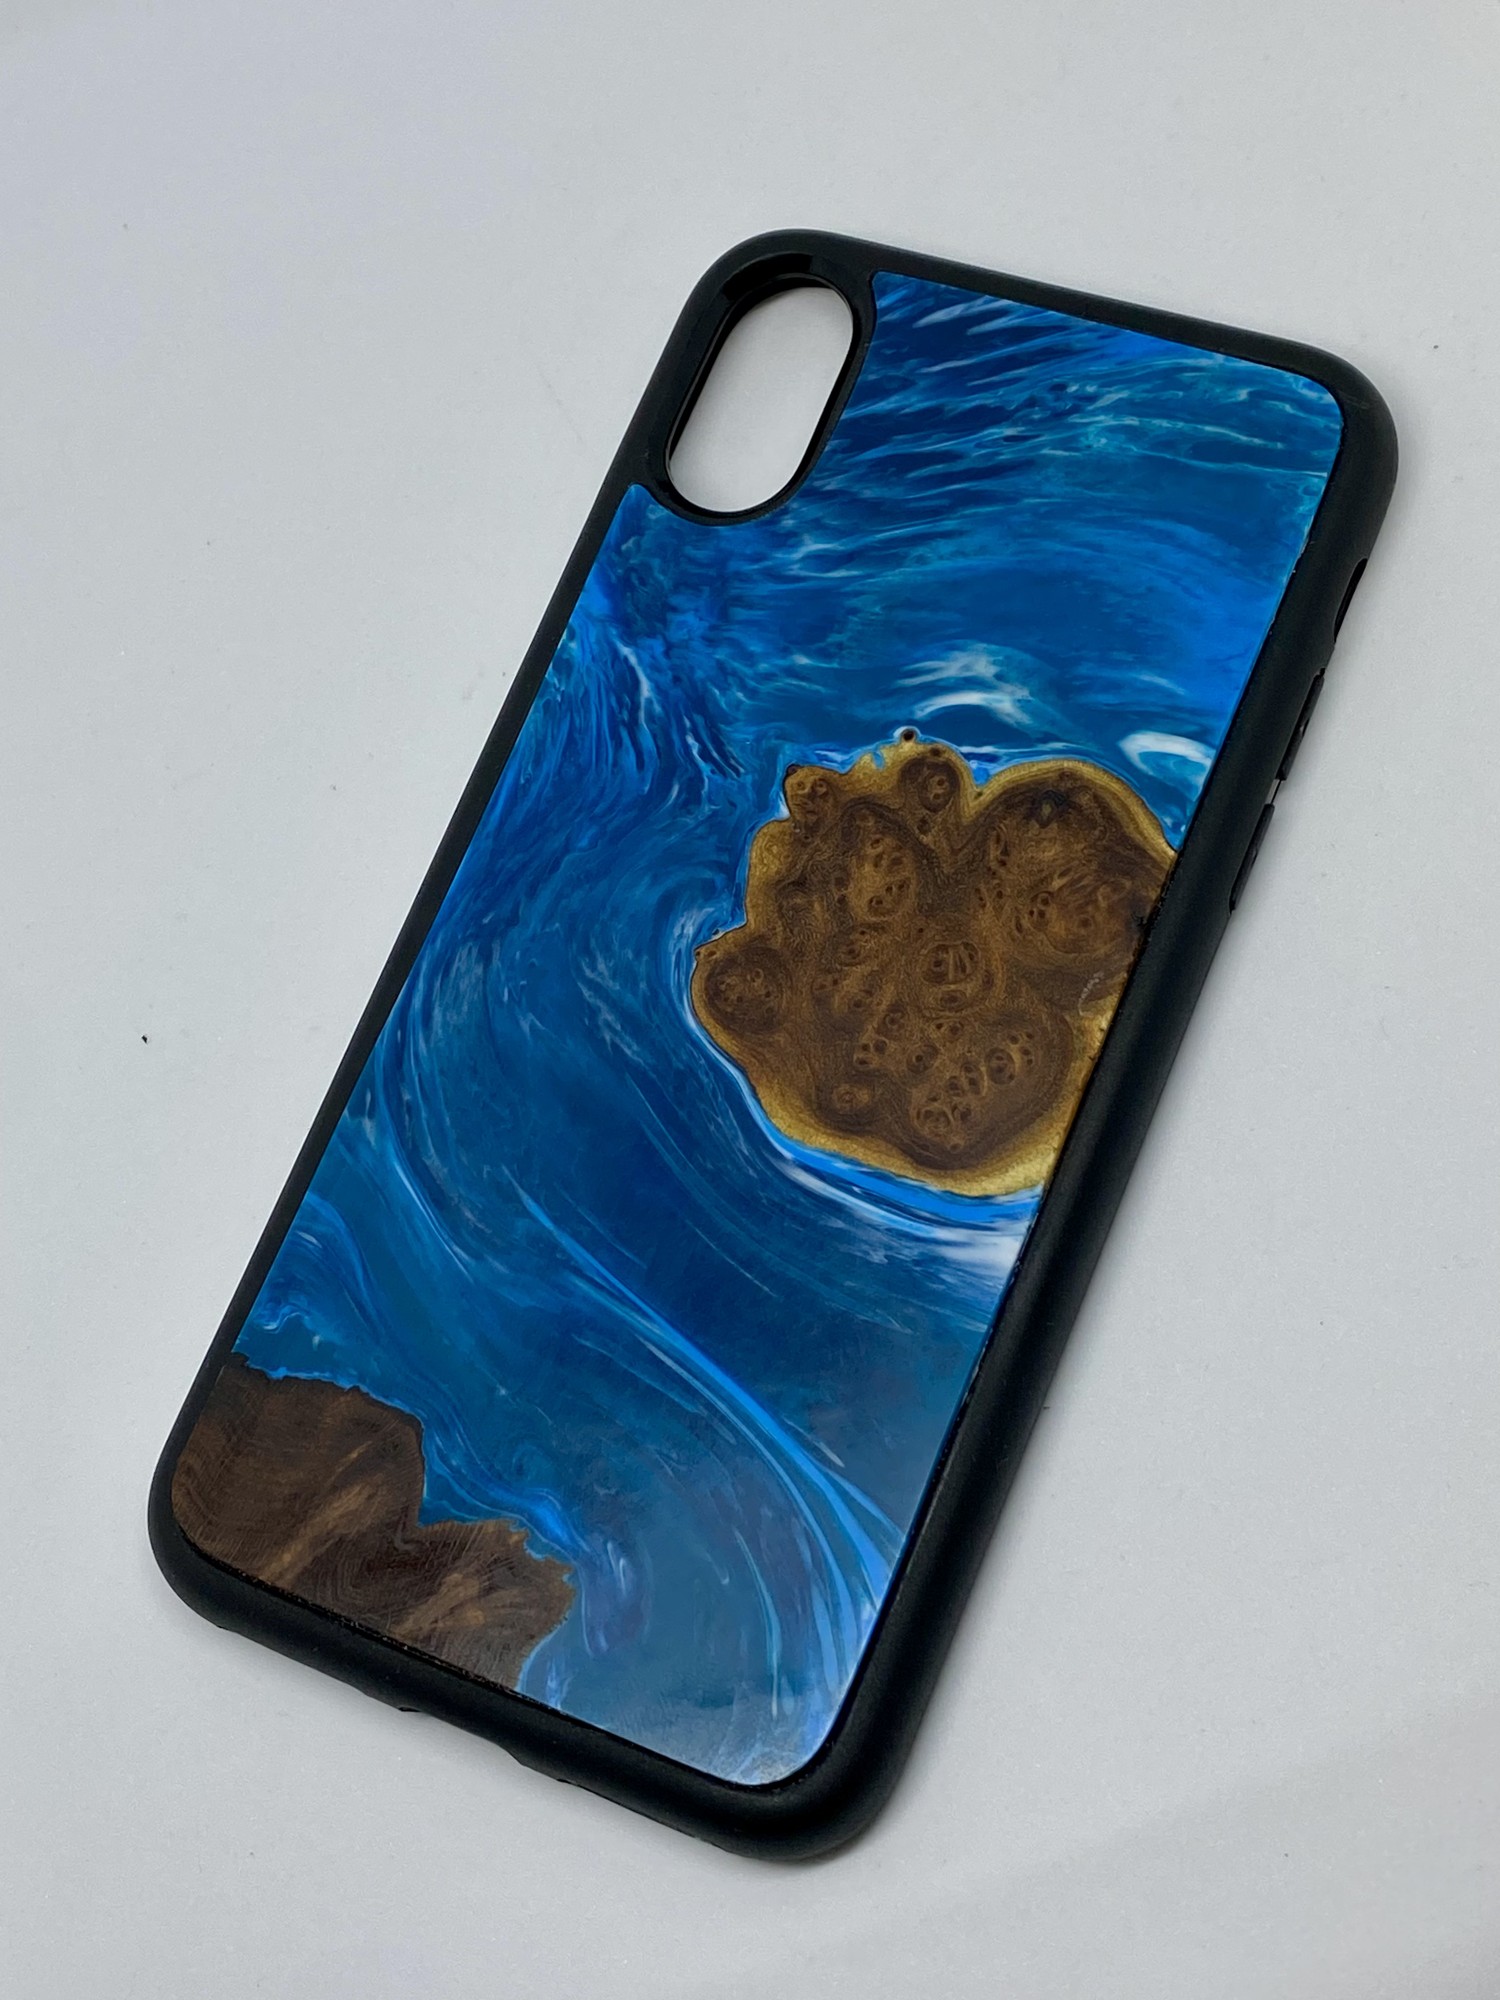 Case for IPhone Xs “Sea”